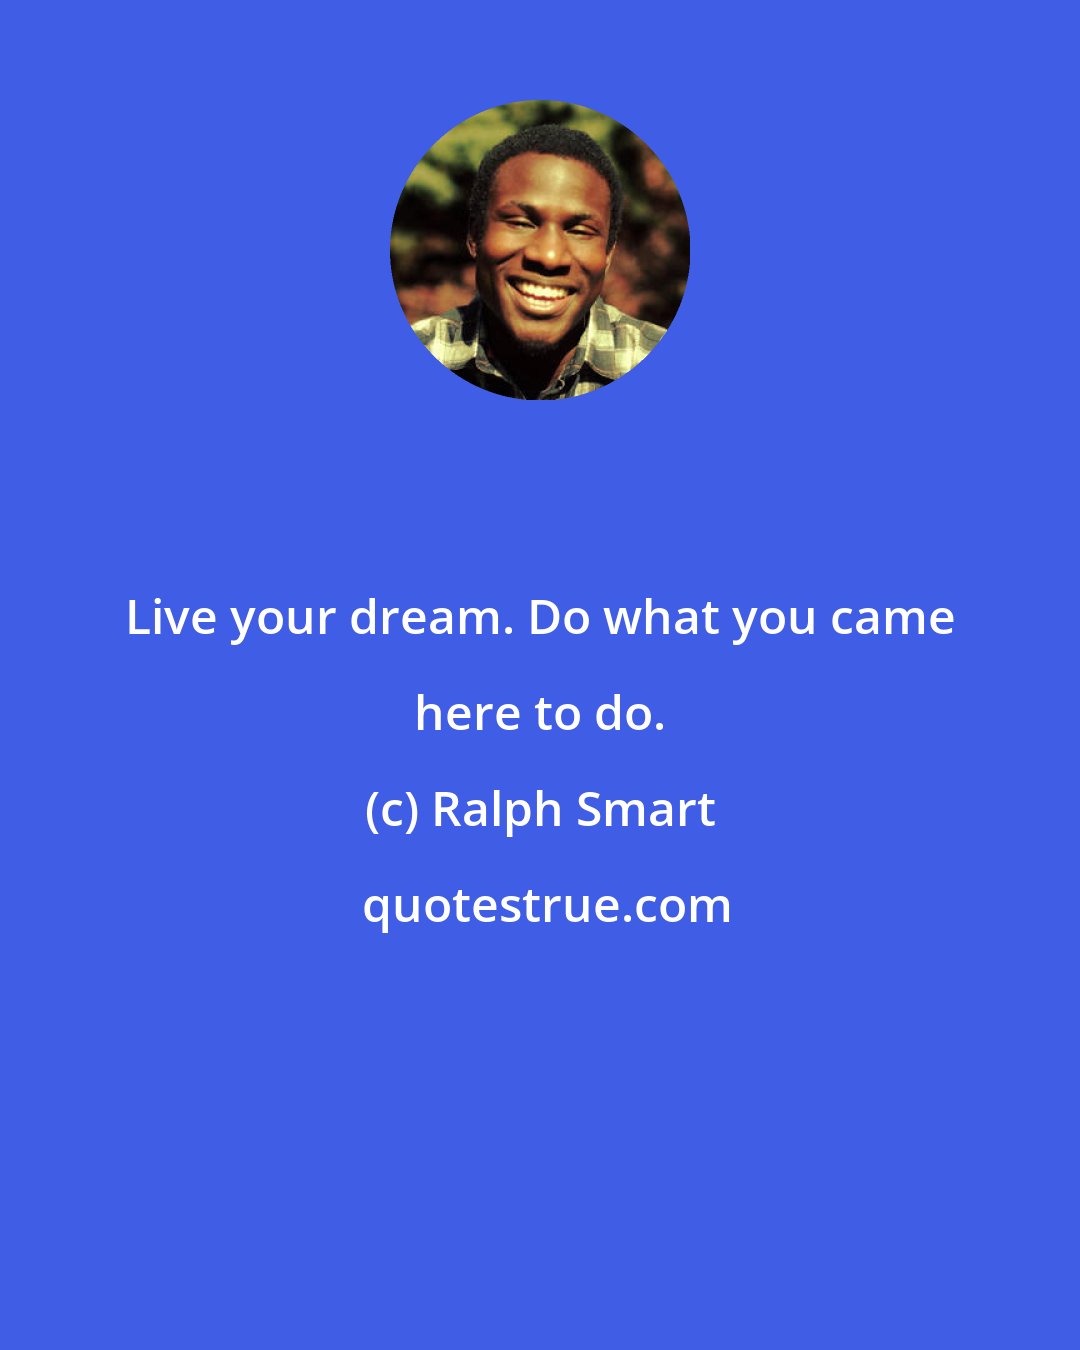 Ralph Smart: Live your dream. Do what you came here to do.